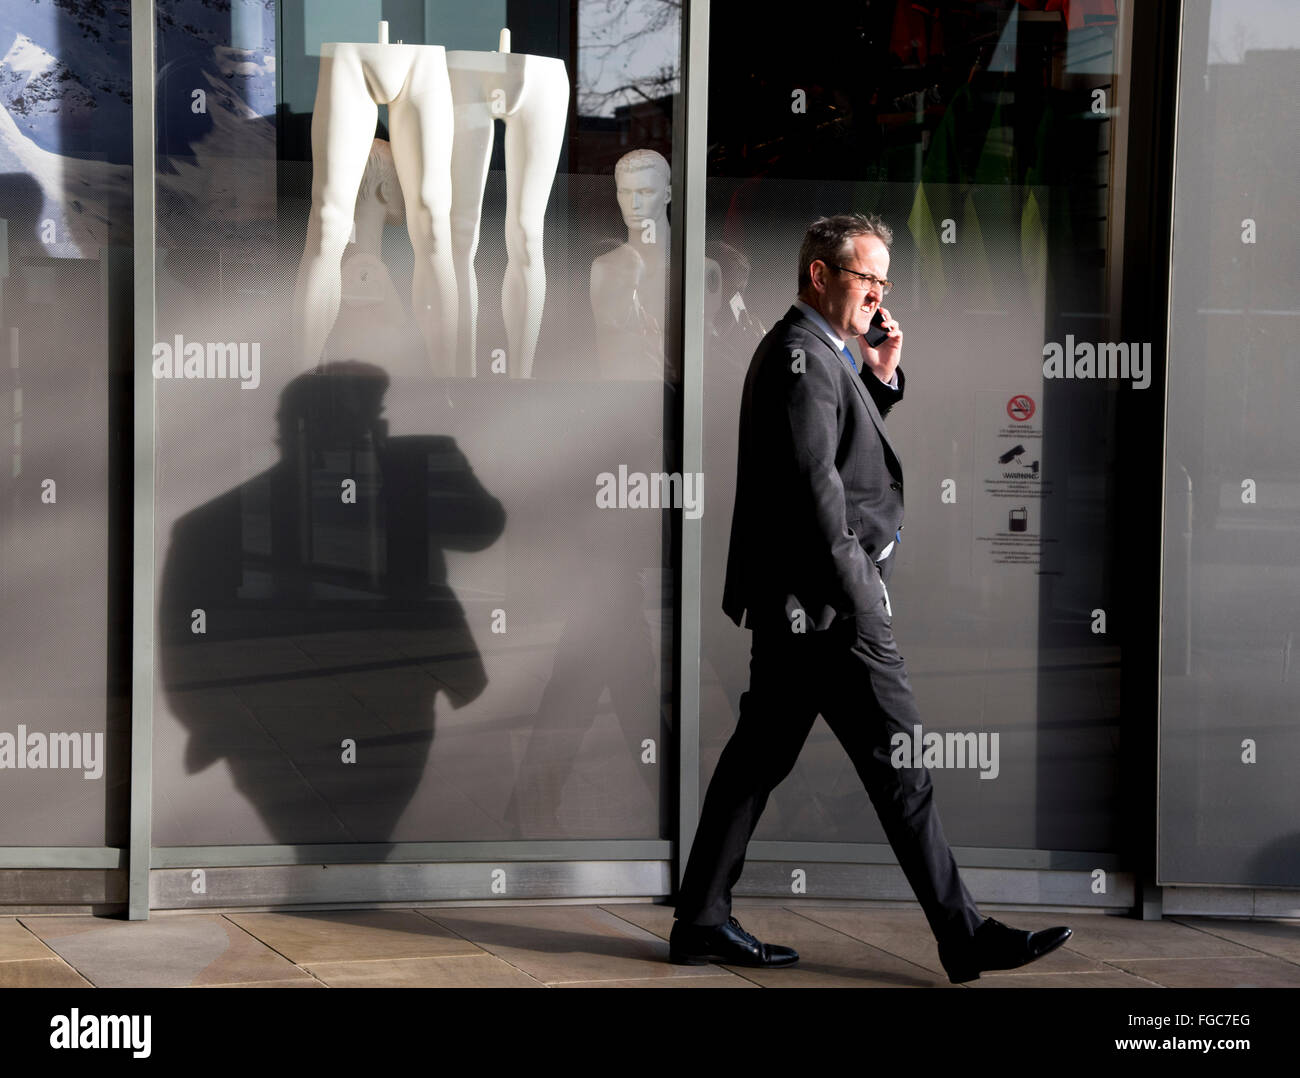 Suited man on phone walking past male mannequin Stock Photo